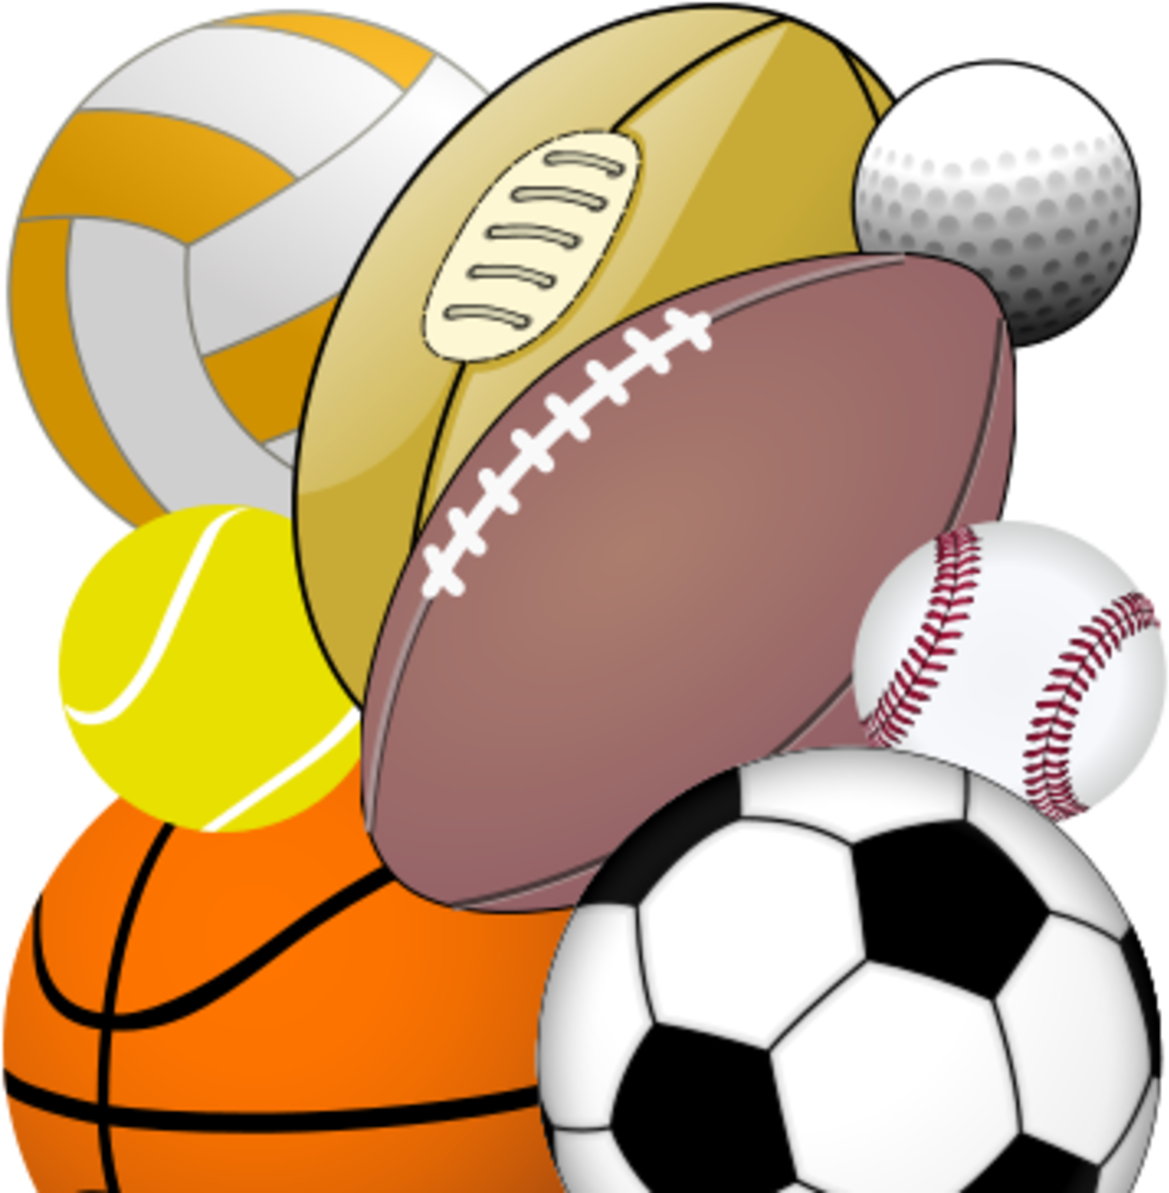 Sports Equipment Clipart Physical Education - Draw A Soccer Ball (1200x1200)